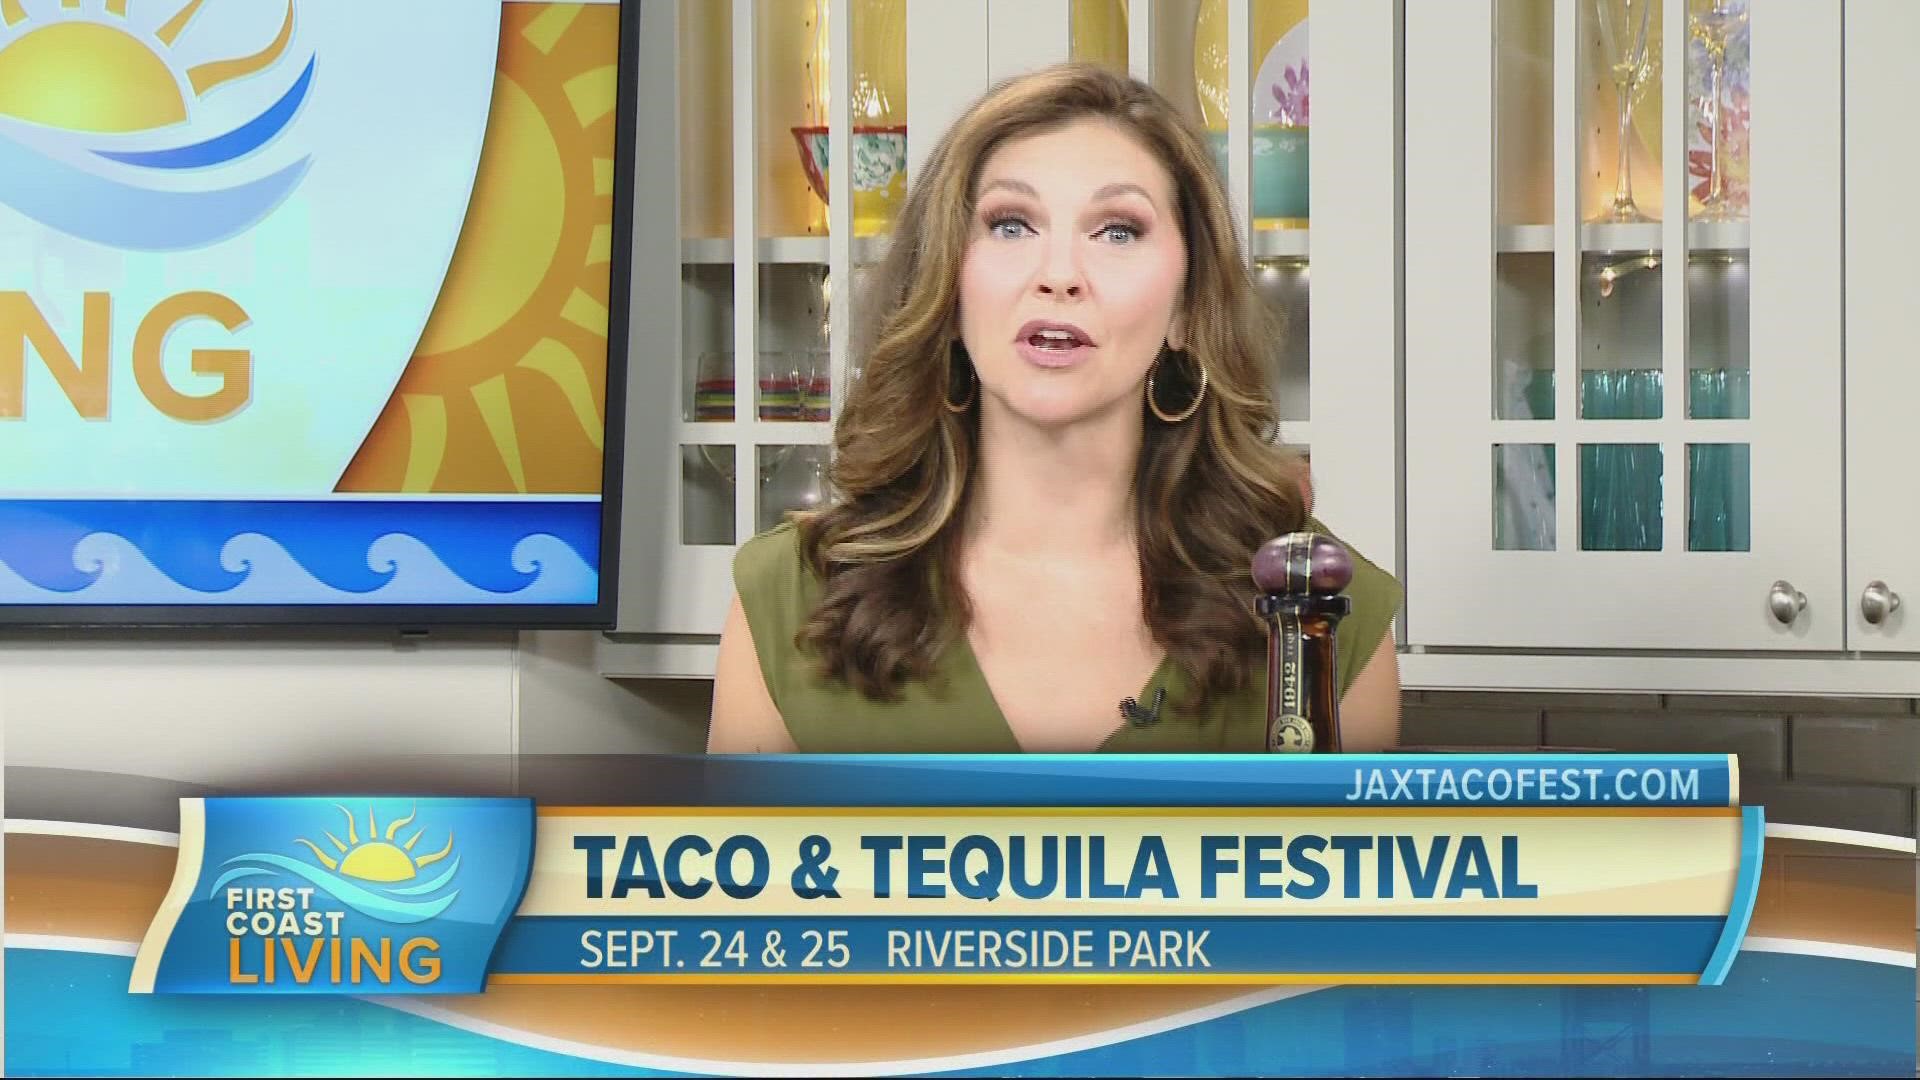 Head to Riverside Park this weekend for delicious tacos, tequila and more!